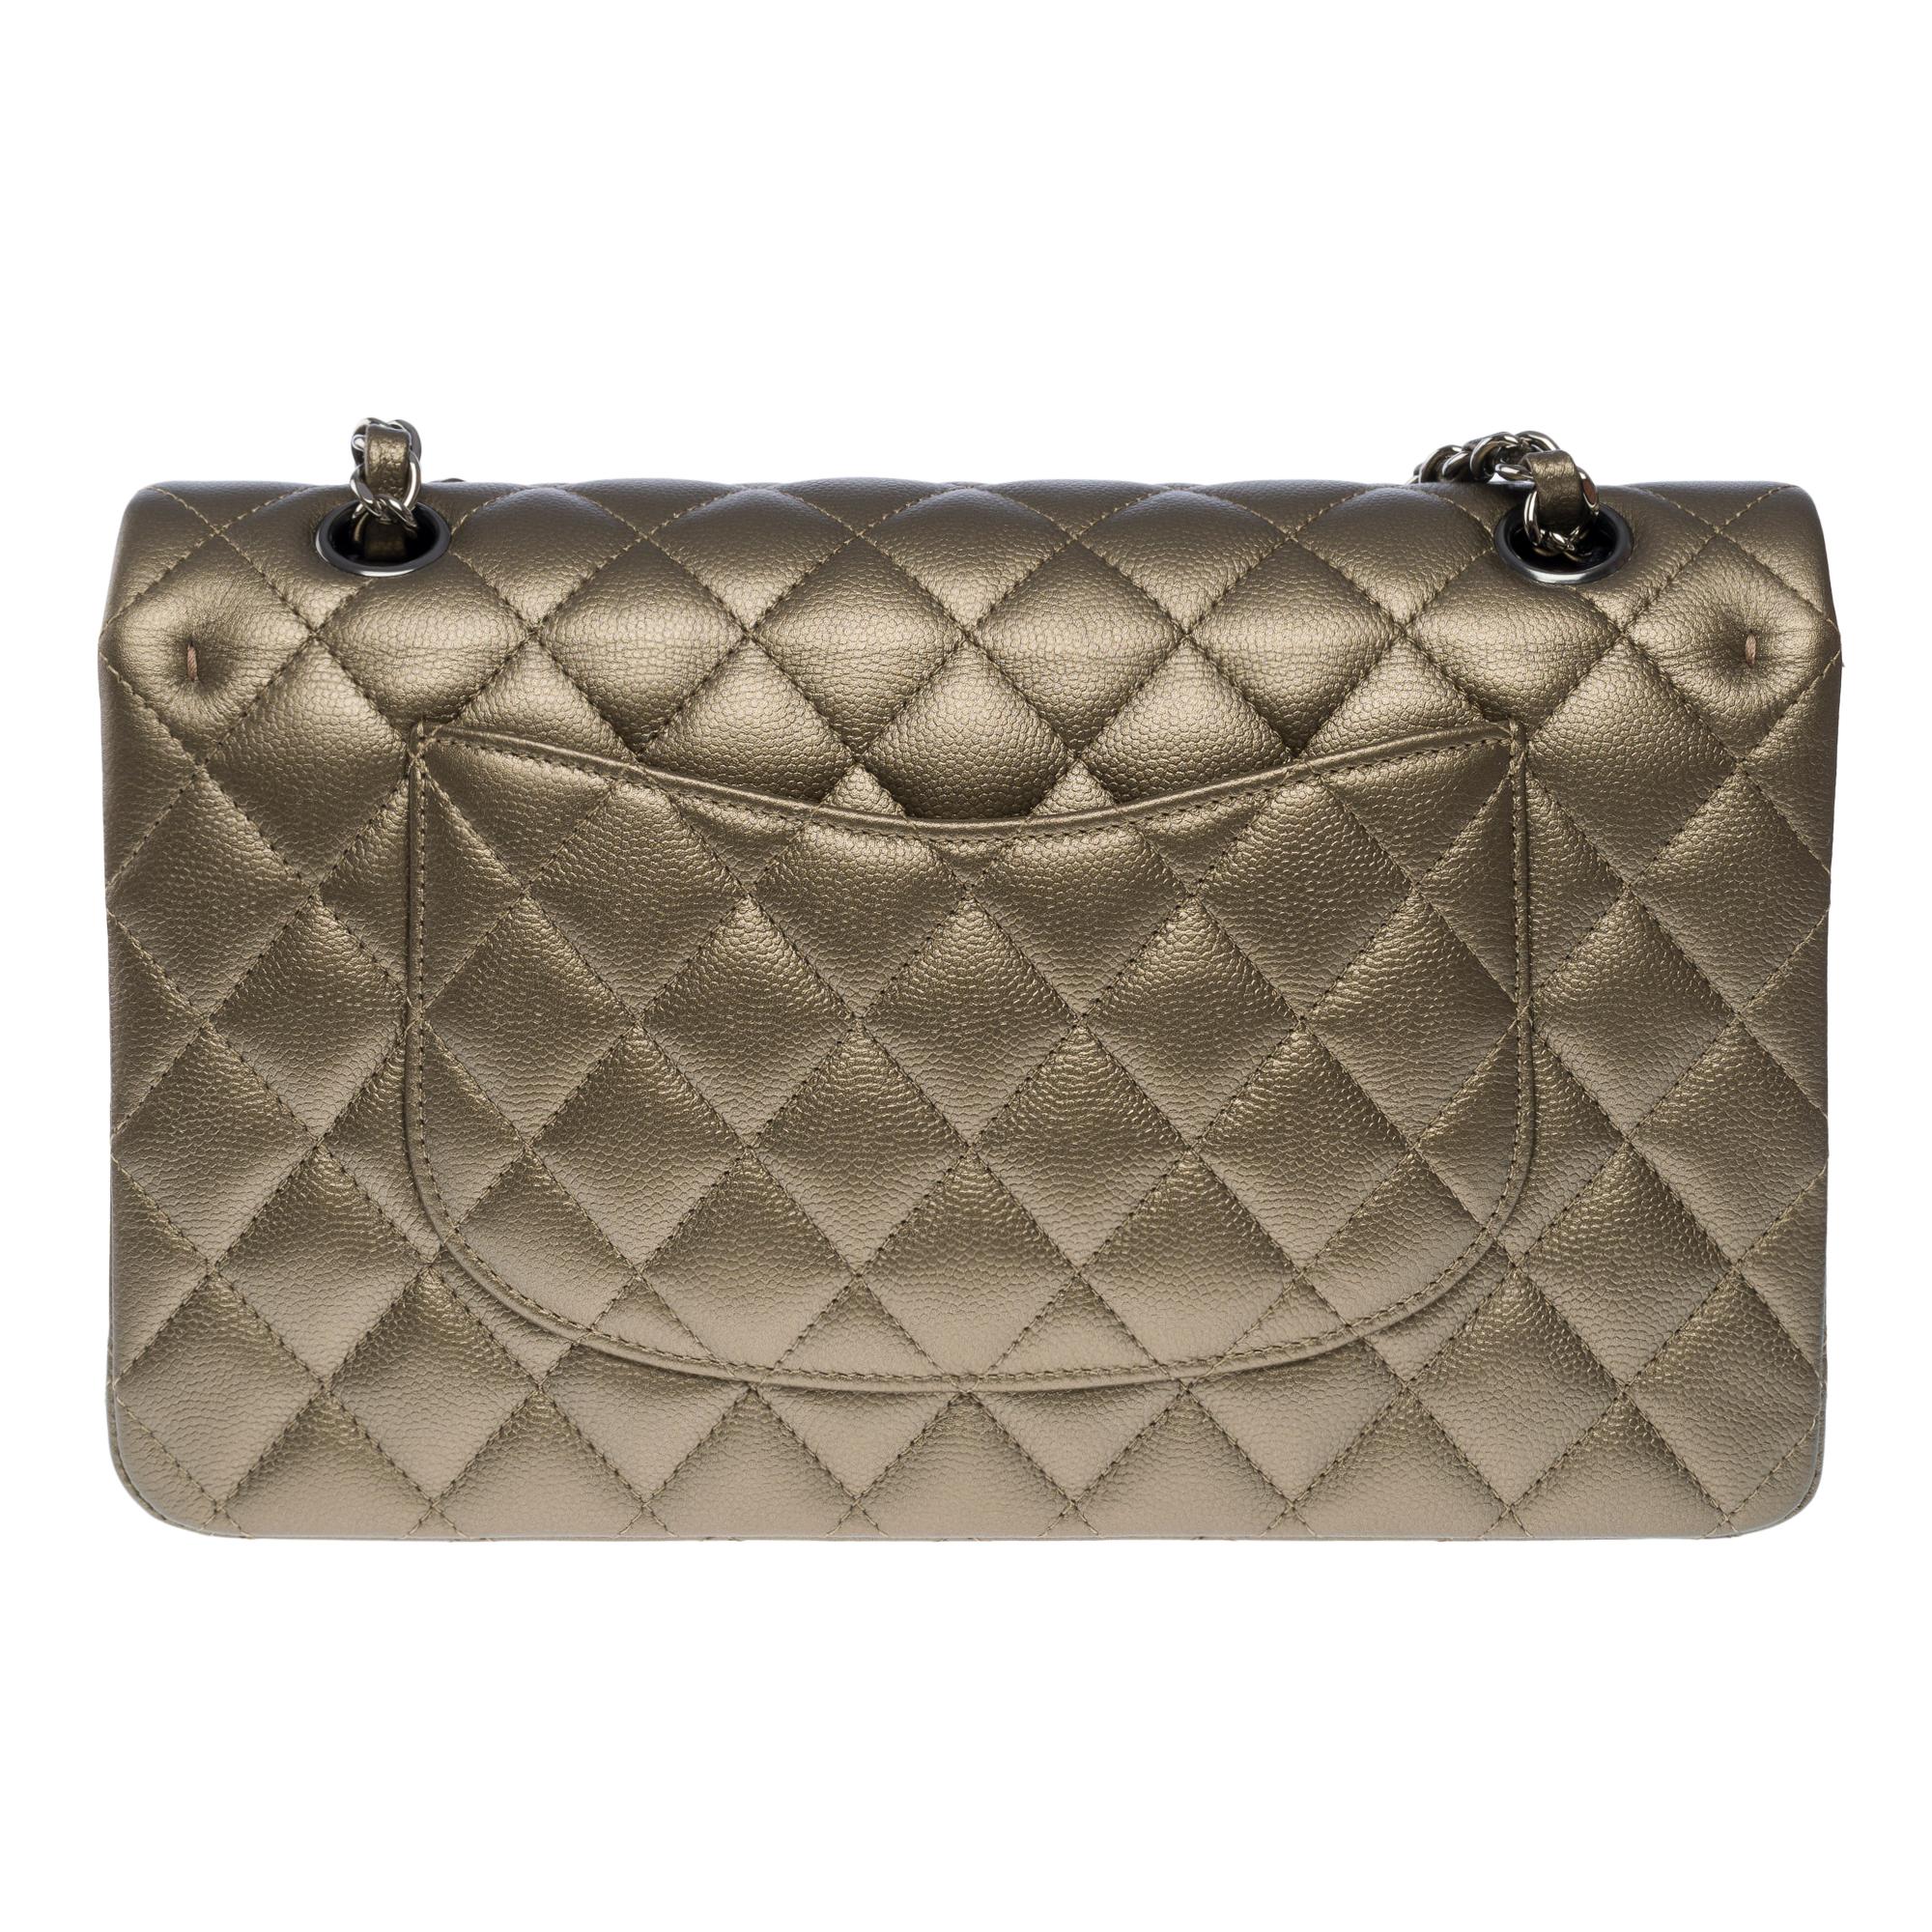 Women's Chanel Timeless double flap shoulder bag in Bronze caviar quilted leather, SHW